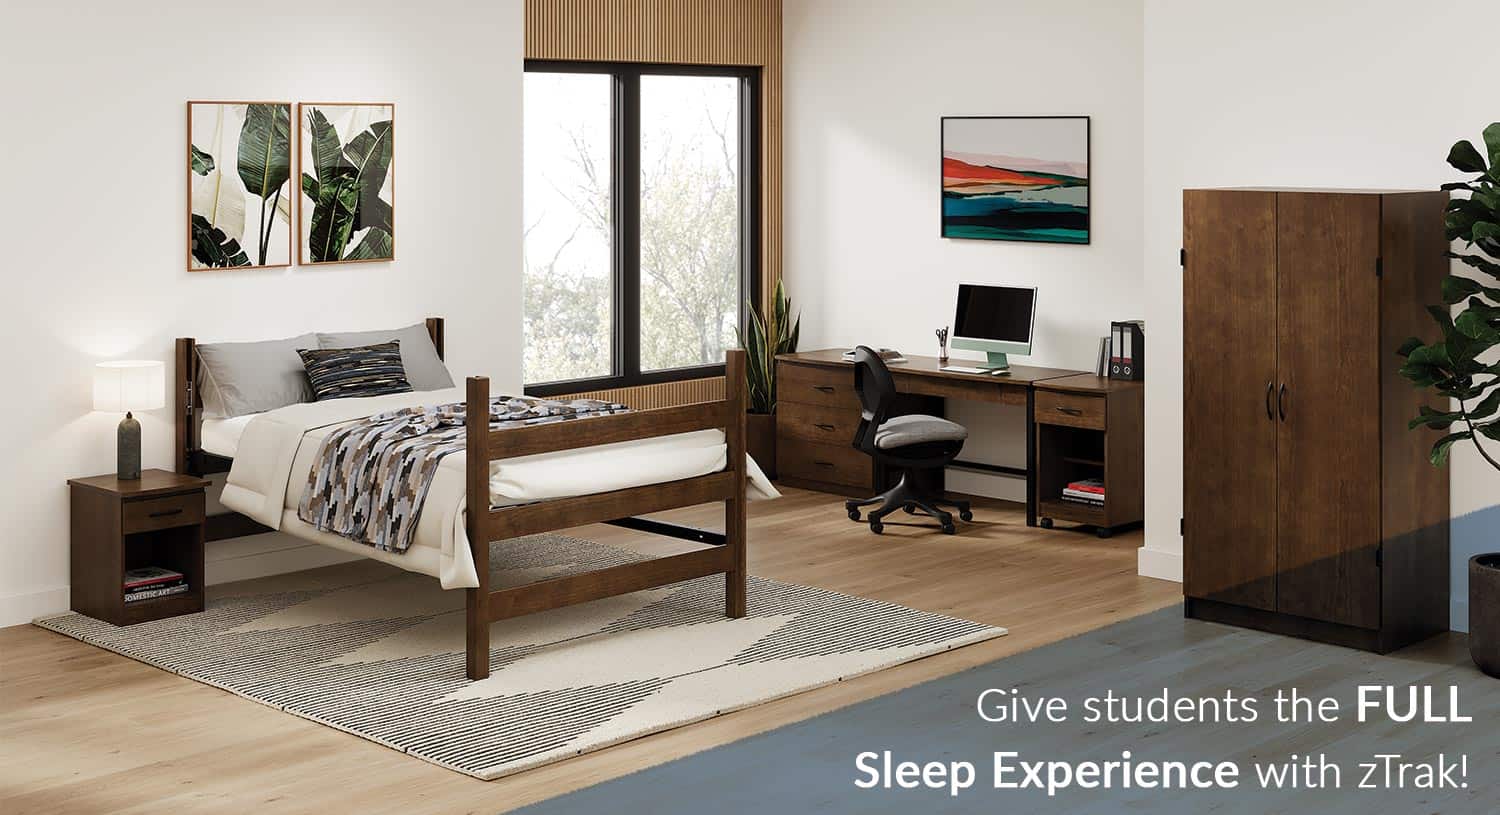 zTrak Full Bed in Student Dorm Room with Merit Collection Casegoods from Sauder Education.